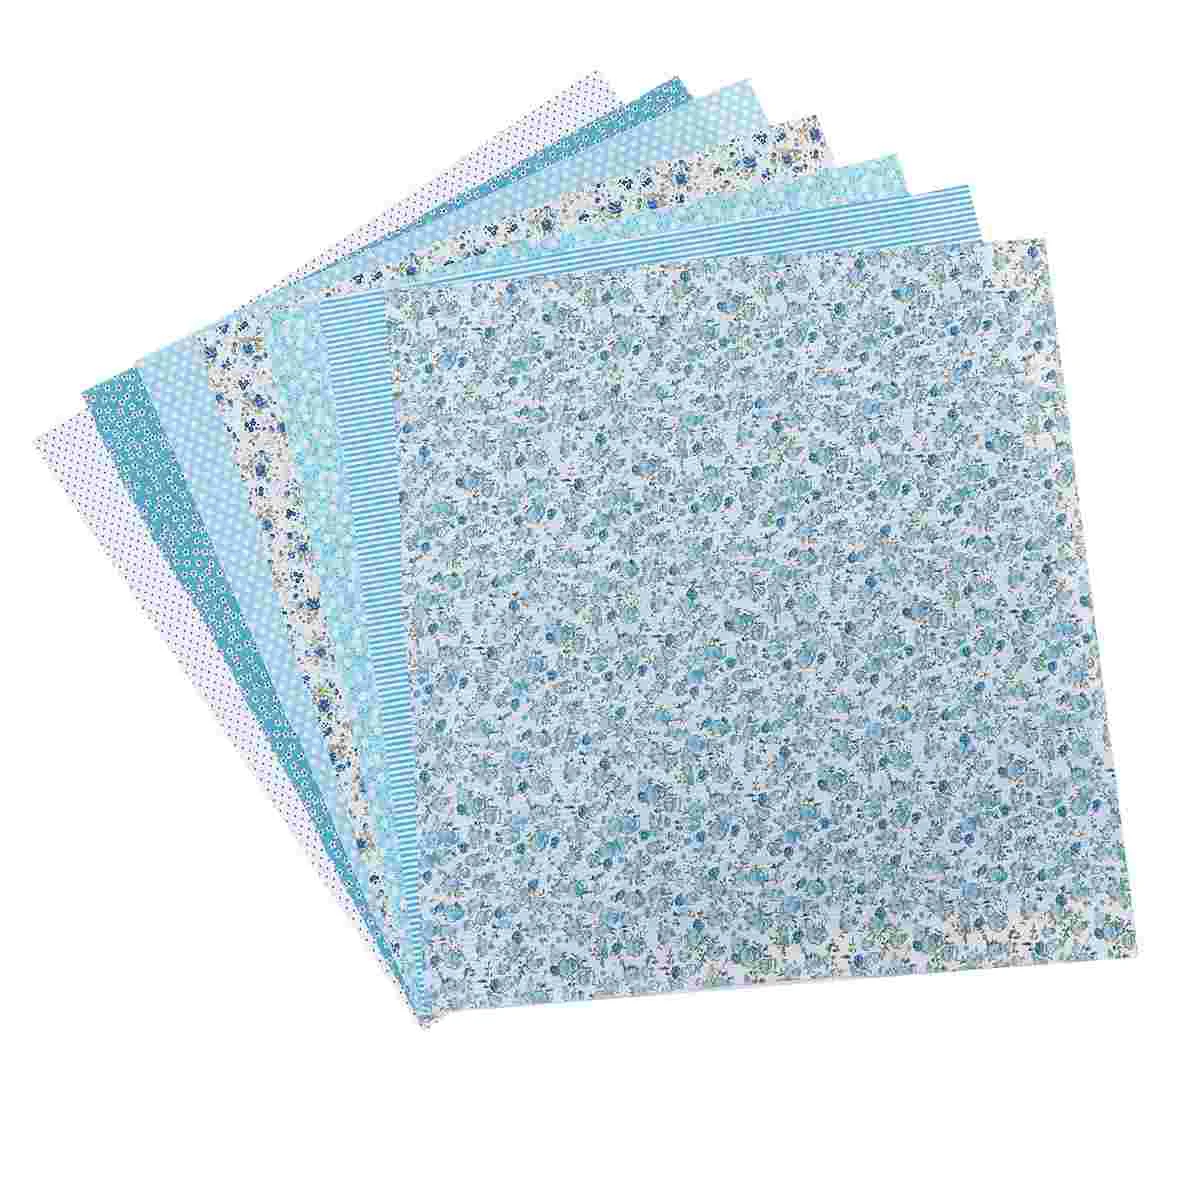 

7 Fat Quarters Fabric Bundles Blue Flower Quilting Patchwork Cotton Plain Cloth for Quilting Sewing Crafting DIY Craft 50cm